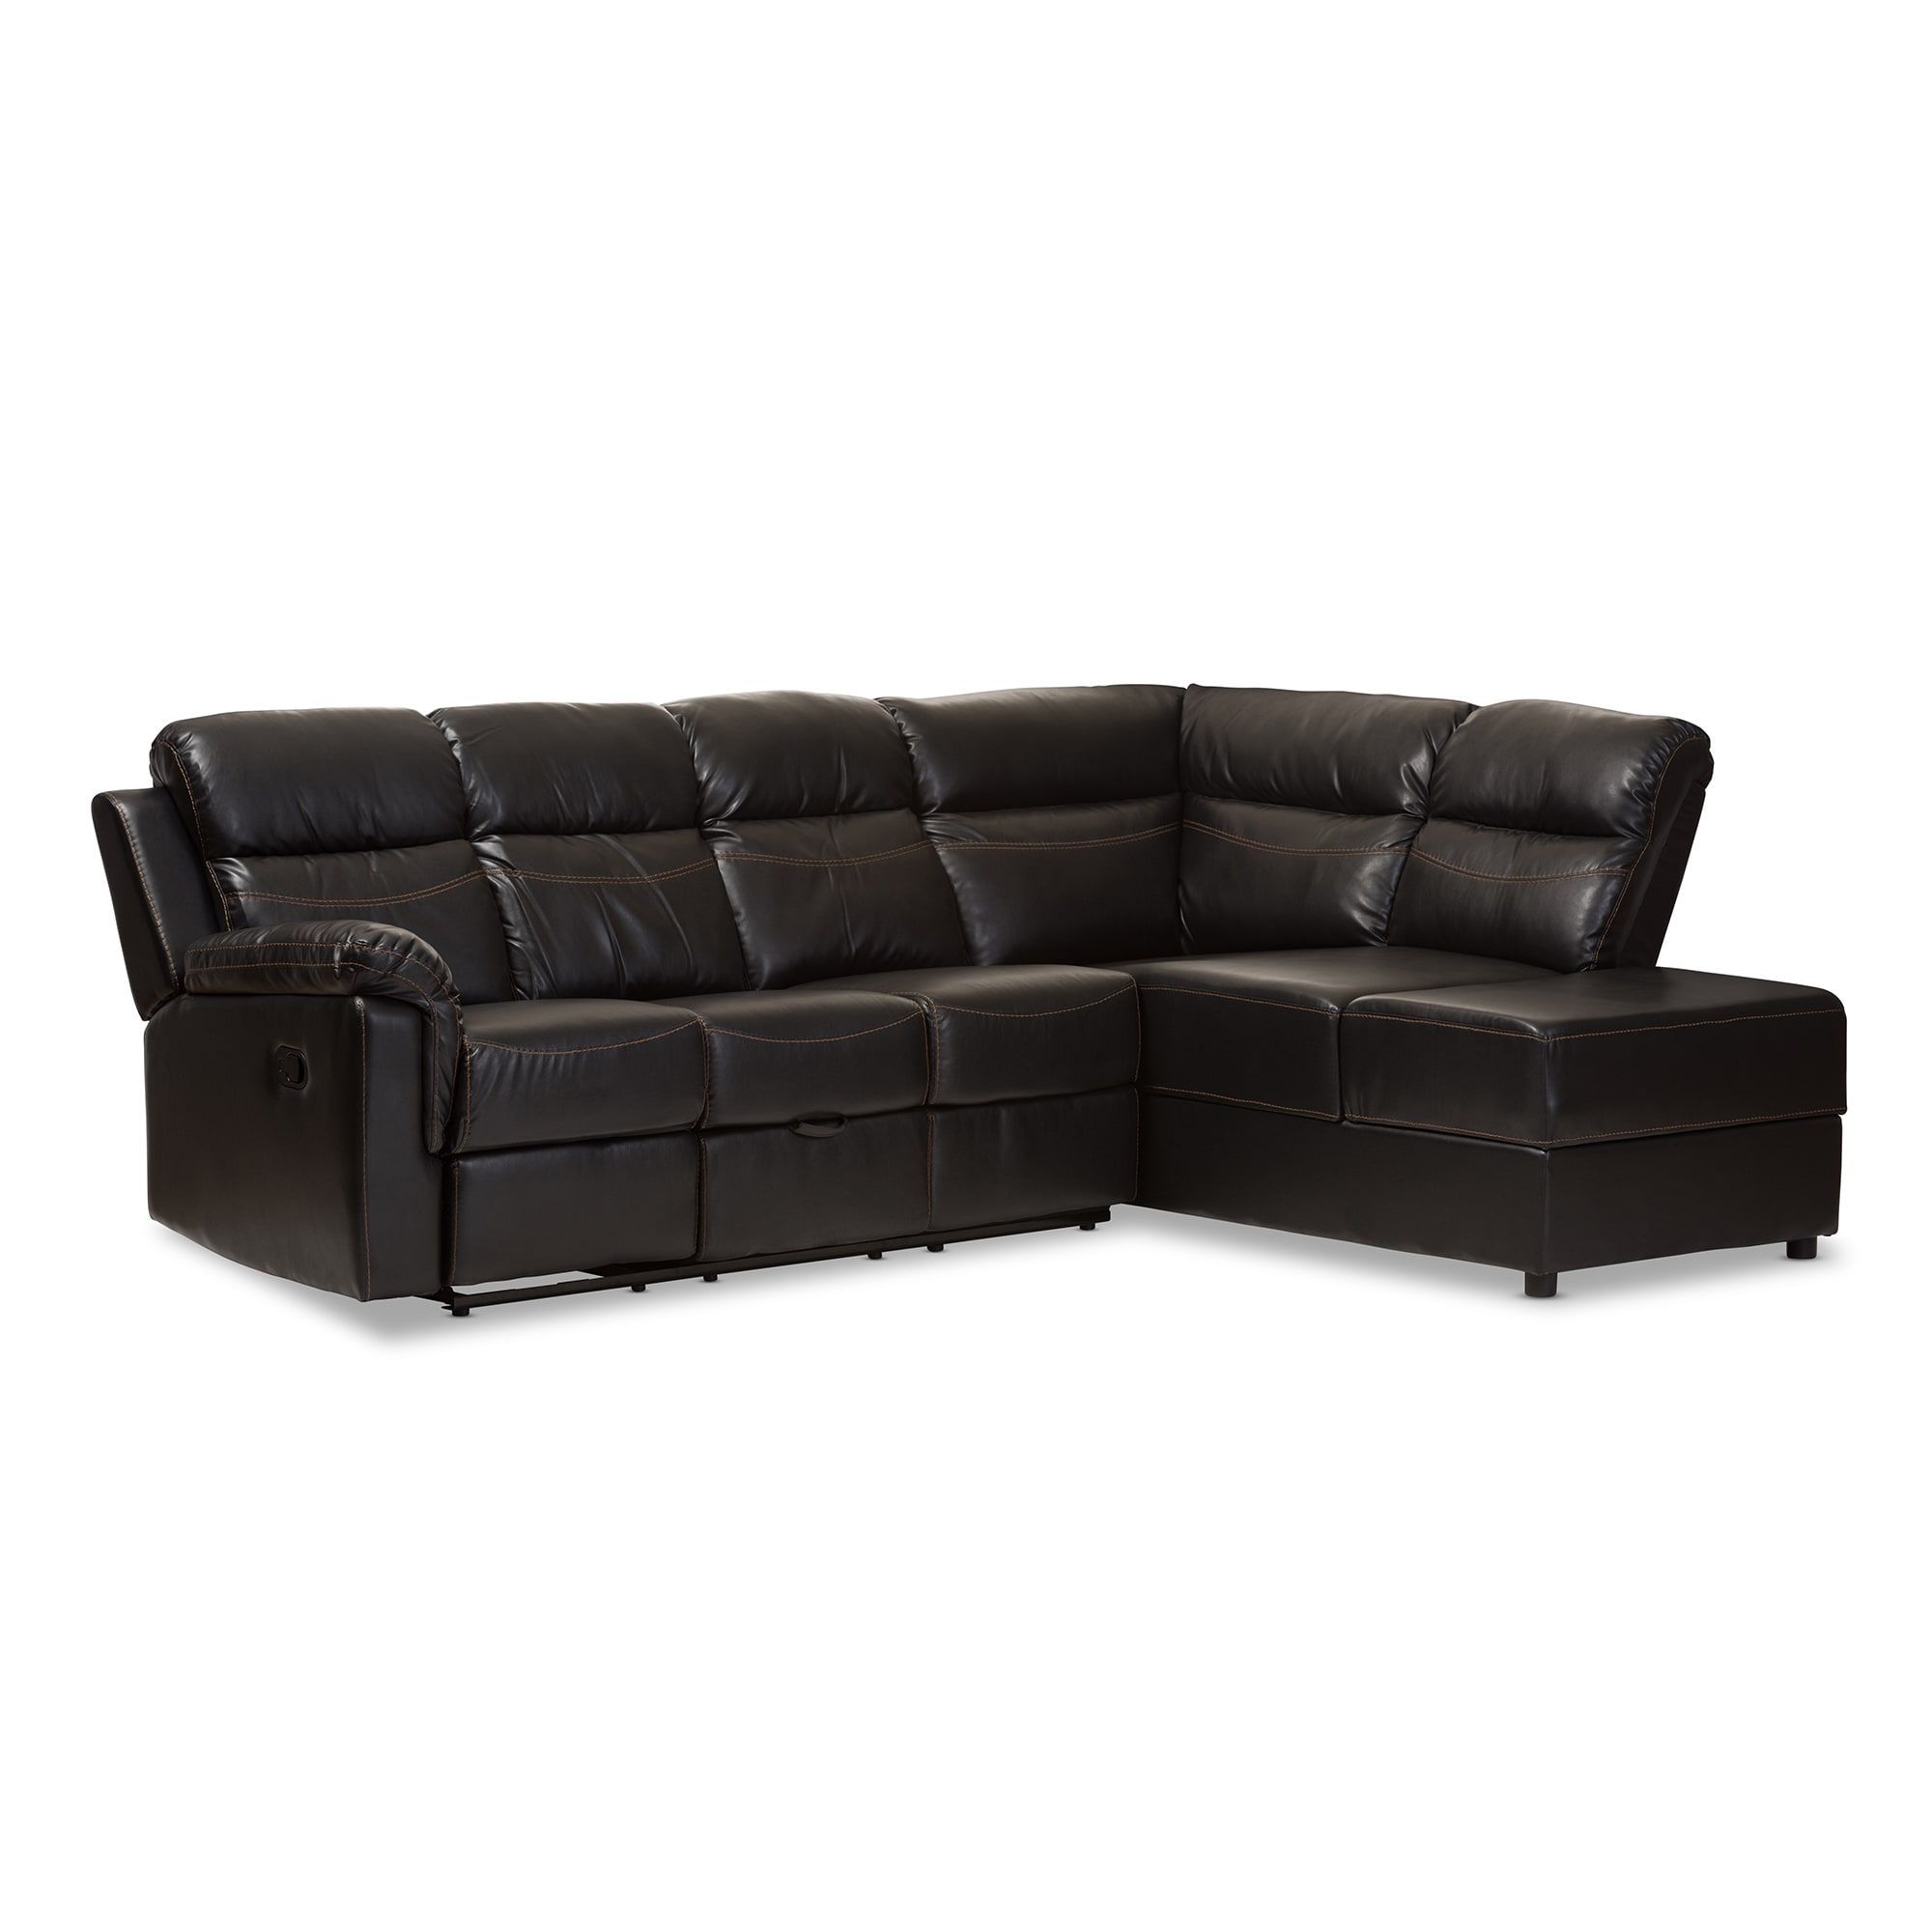 Our Best Living Room Furniture Deals | Storage Chaise Throughout 2Pc Burland Contemporary Sectional Sofas Charcoal (View 15 of 15)